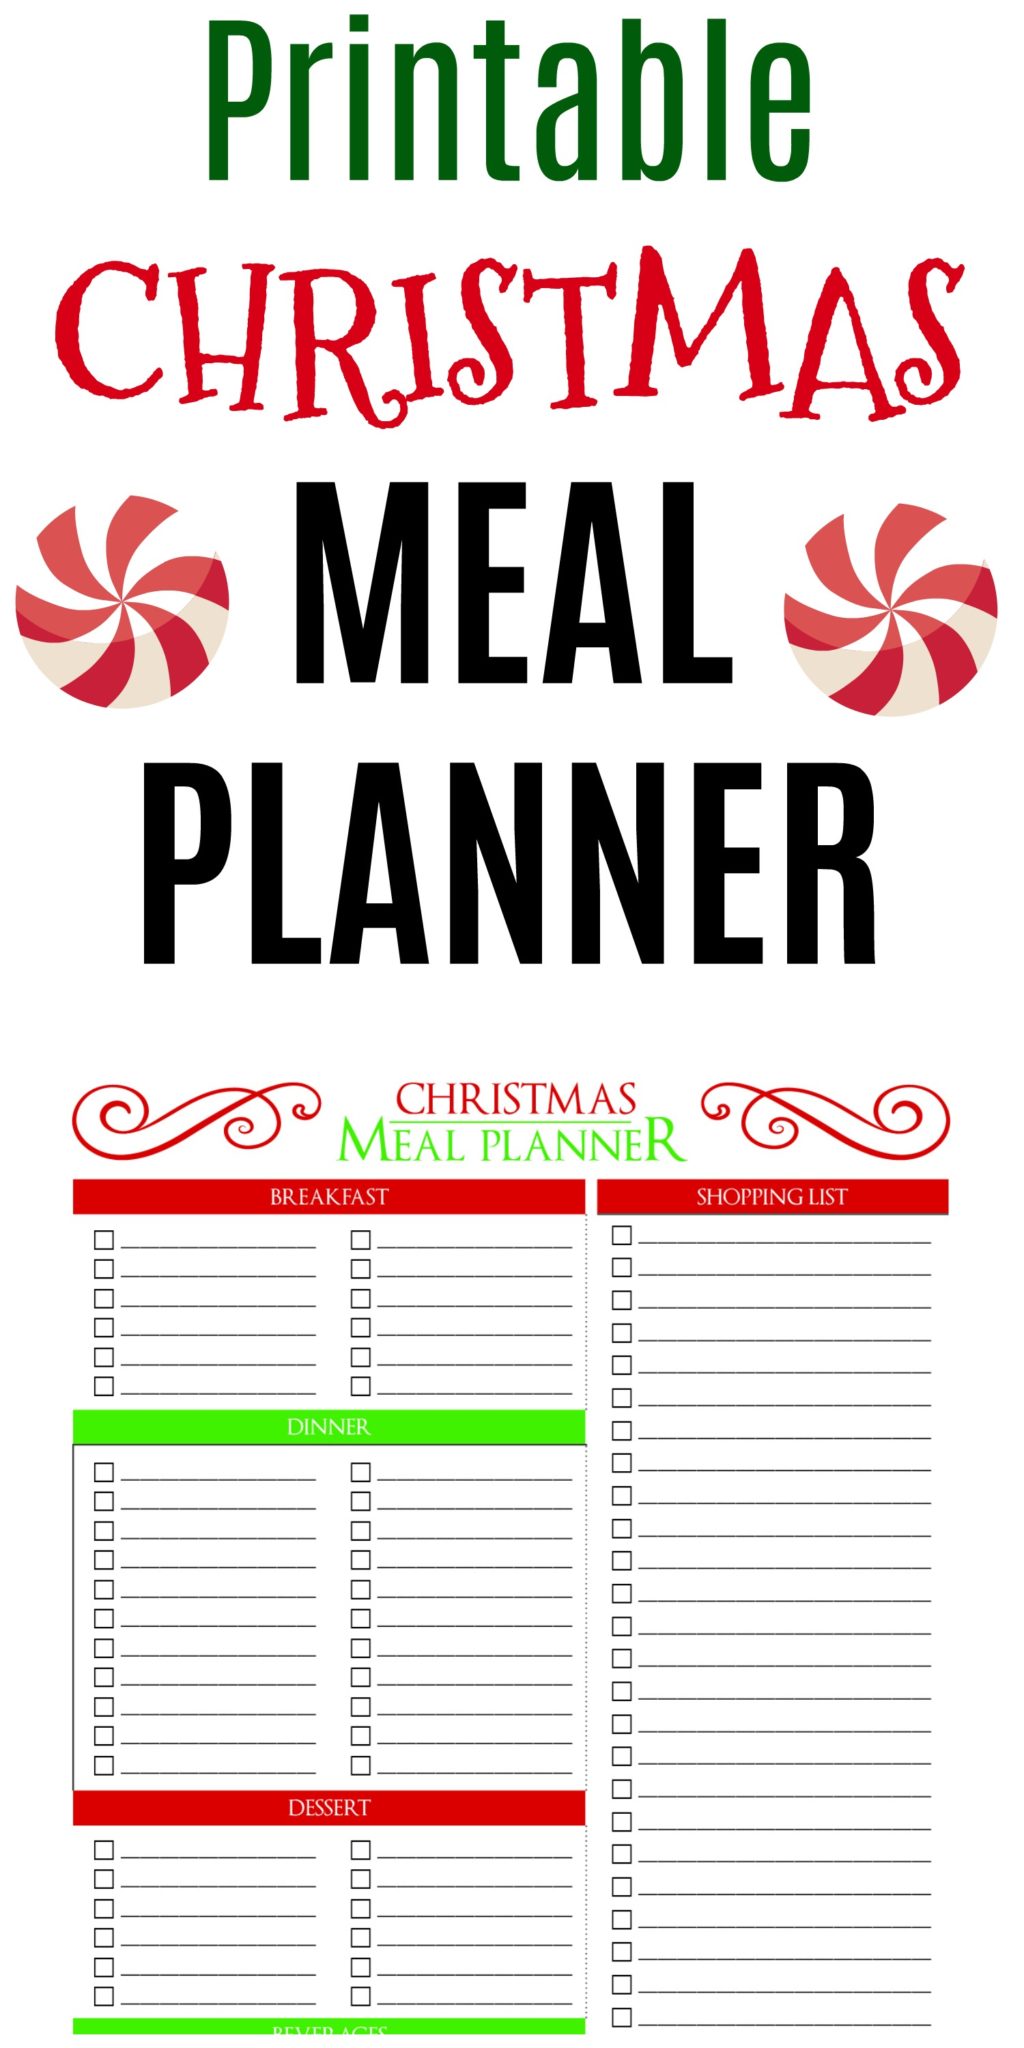 This Christmas Meal Planner Will Save Your Sanity